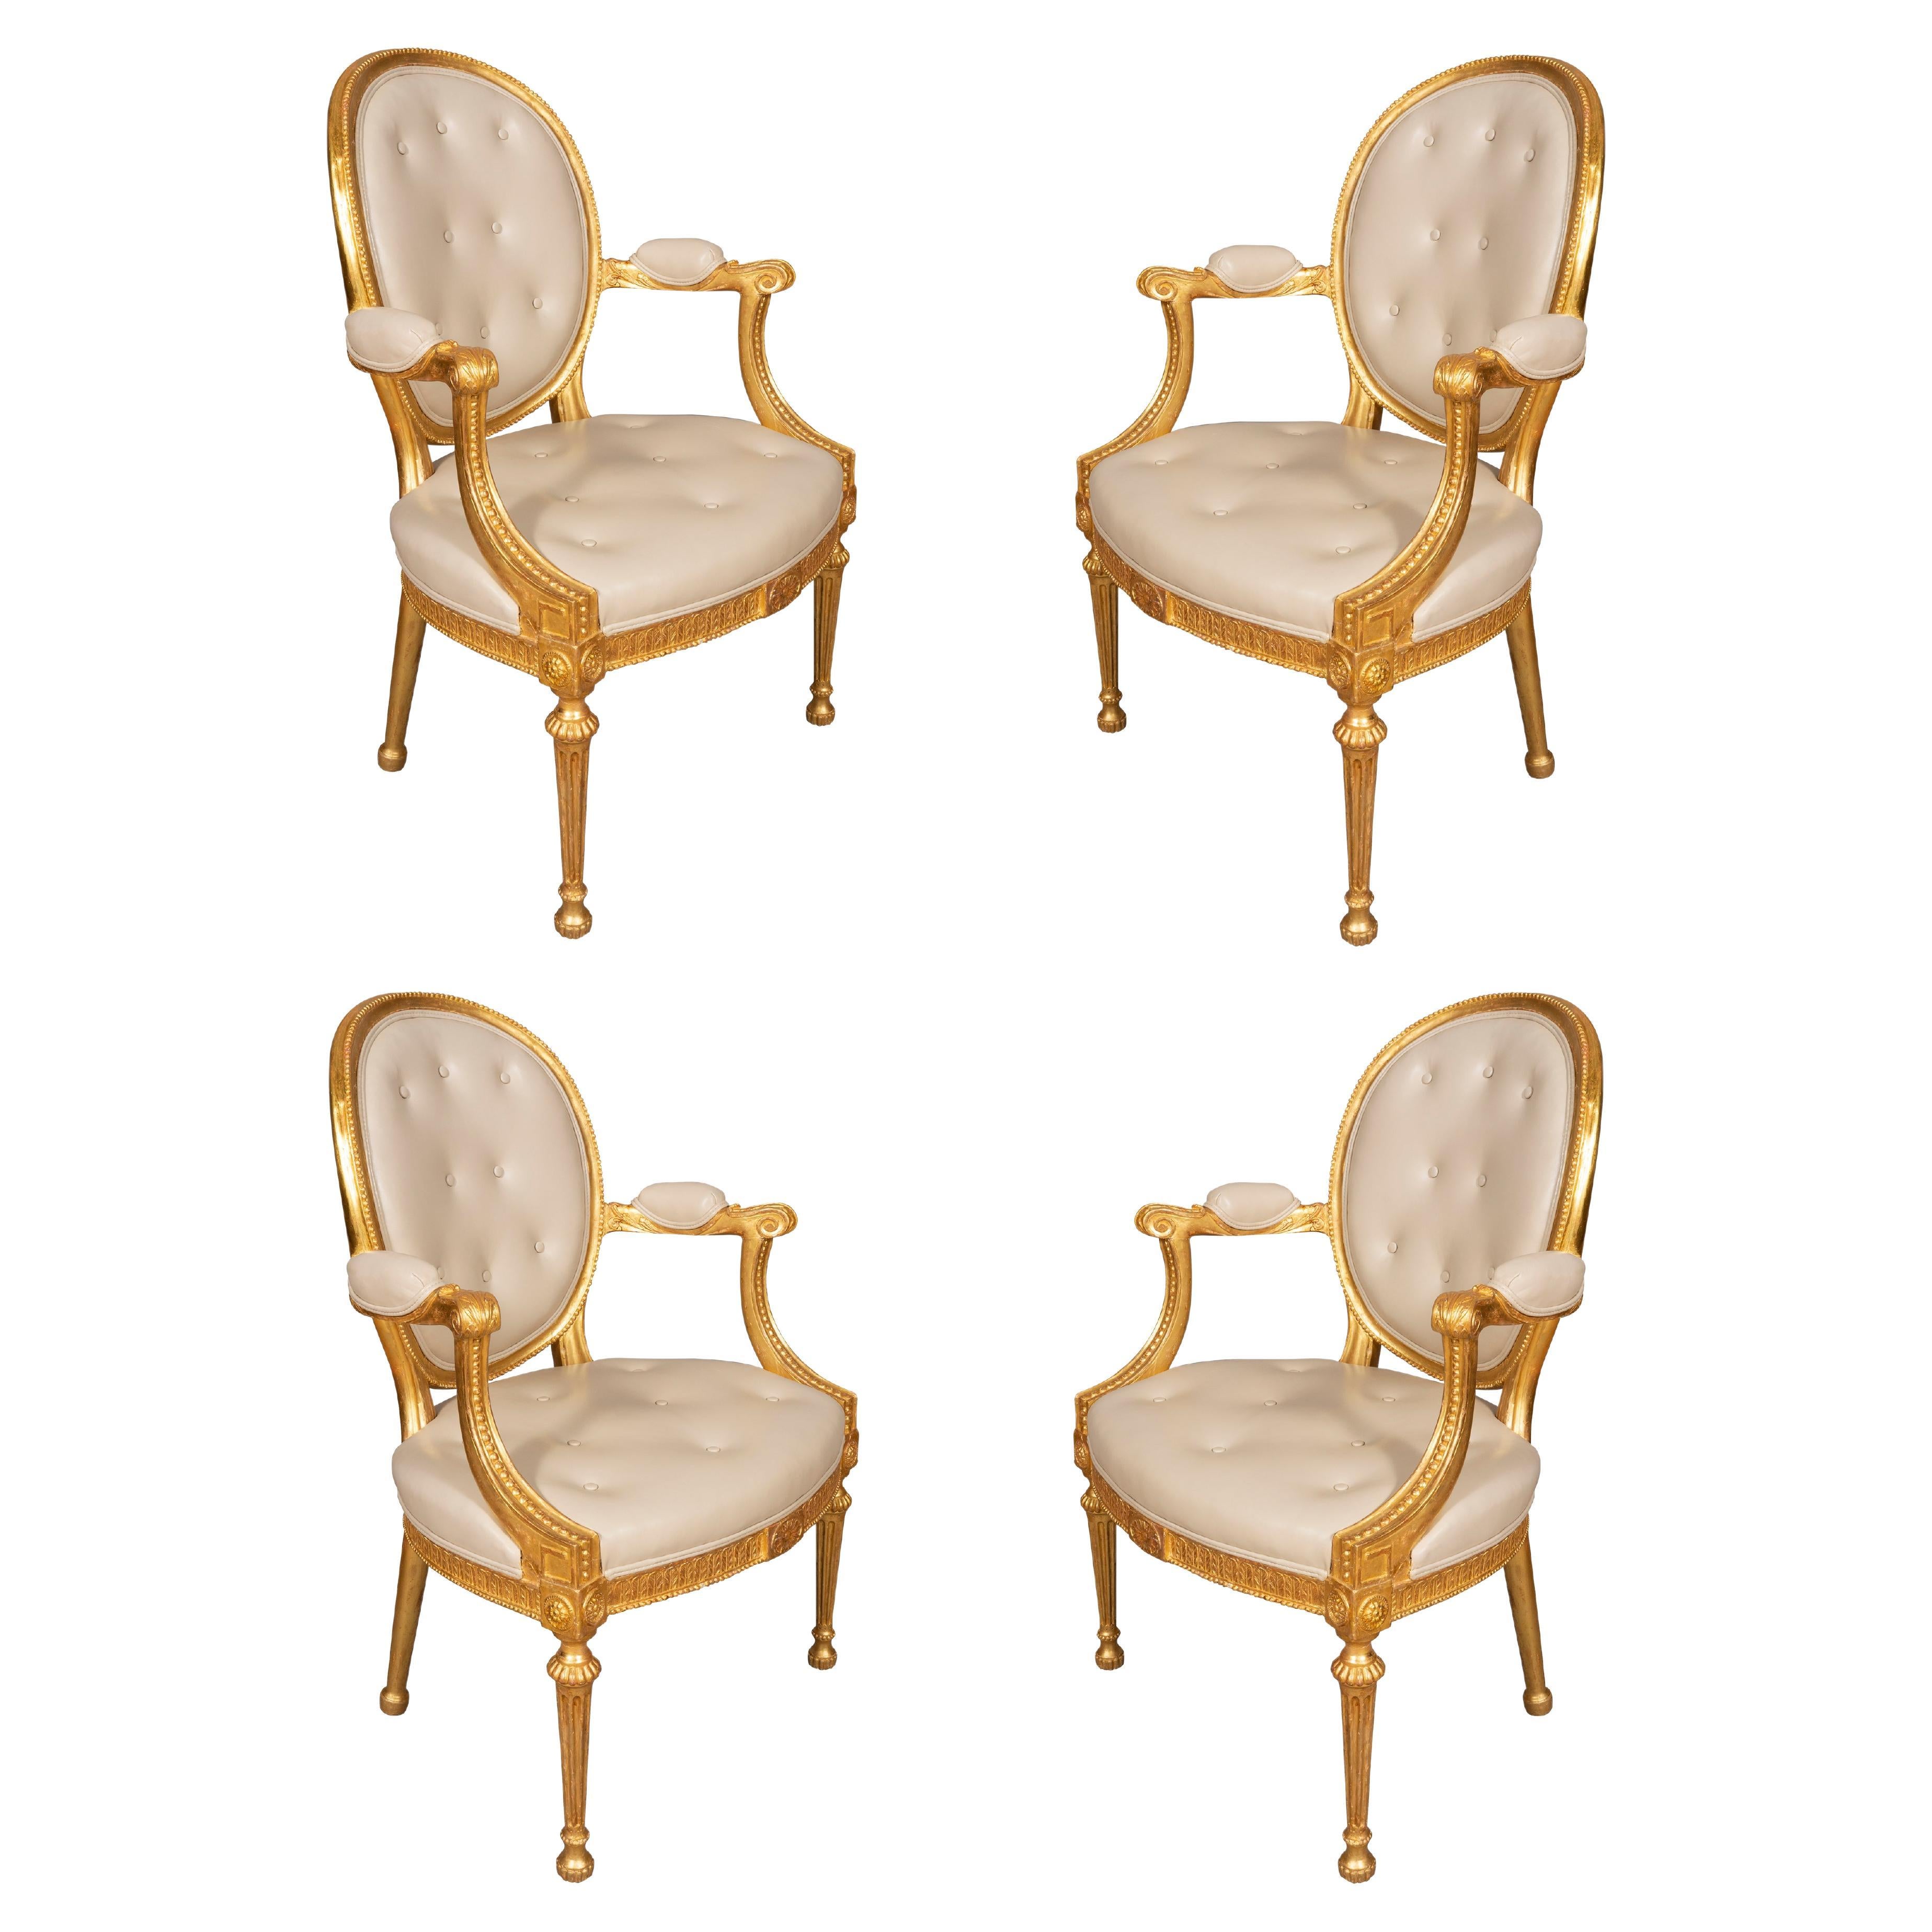 Set of Four George III Style Giltwood Armchairs